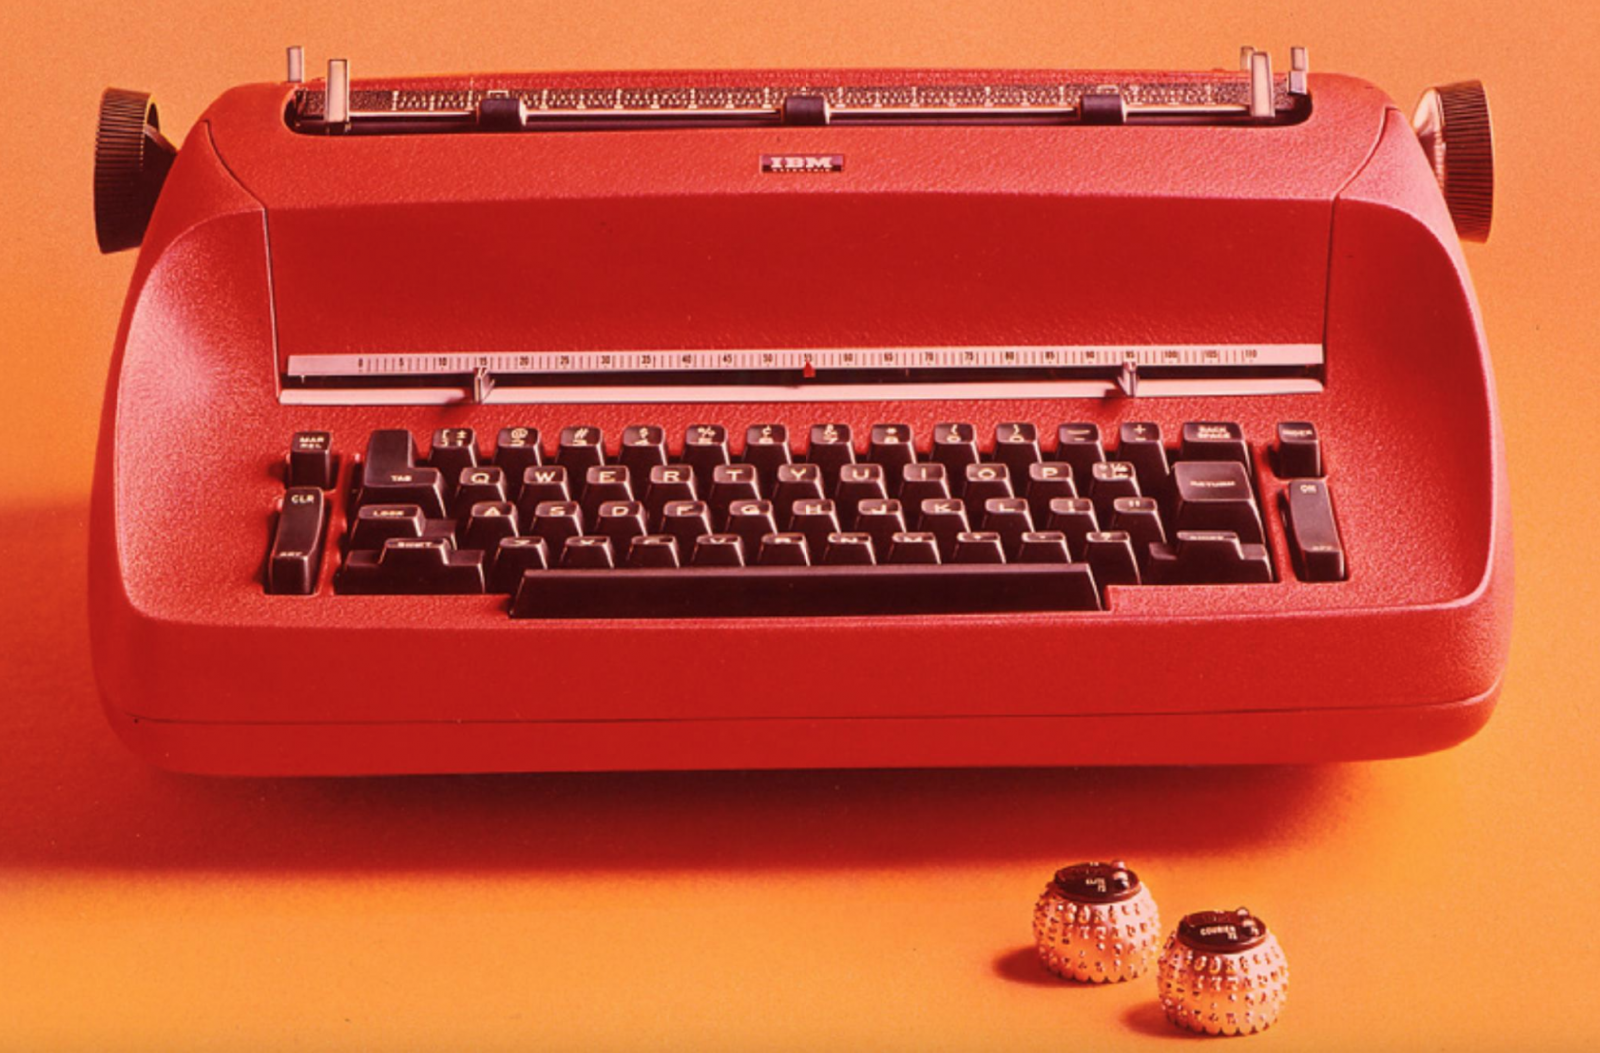 The IBM Selectric. State of the art typesetting in 1979...